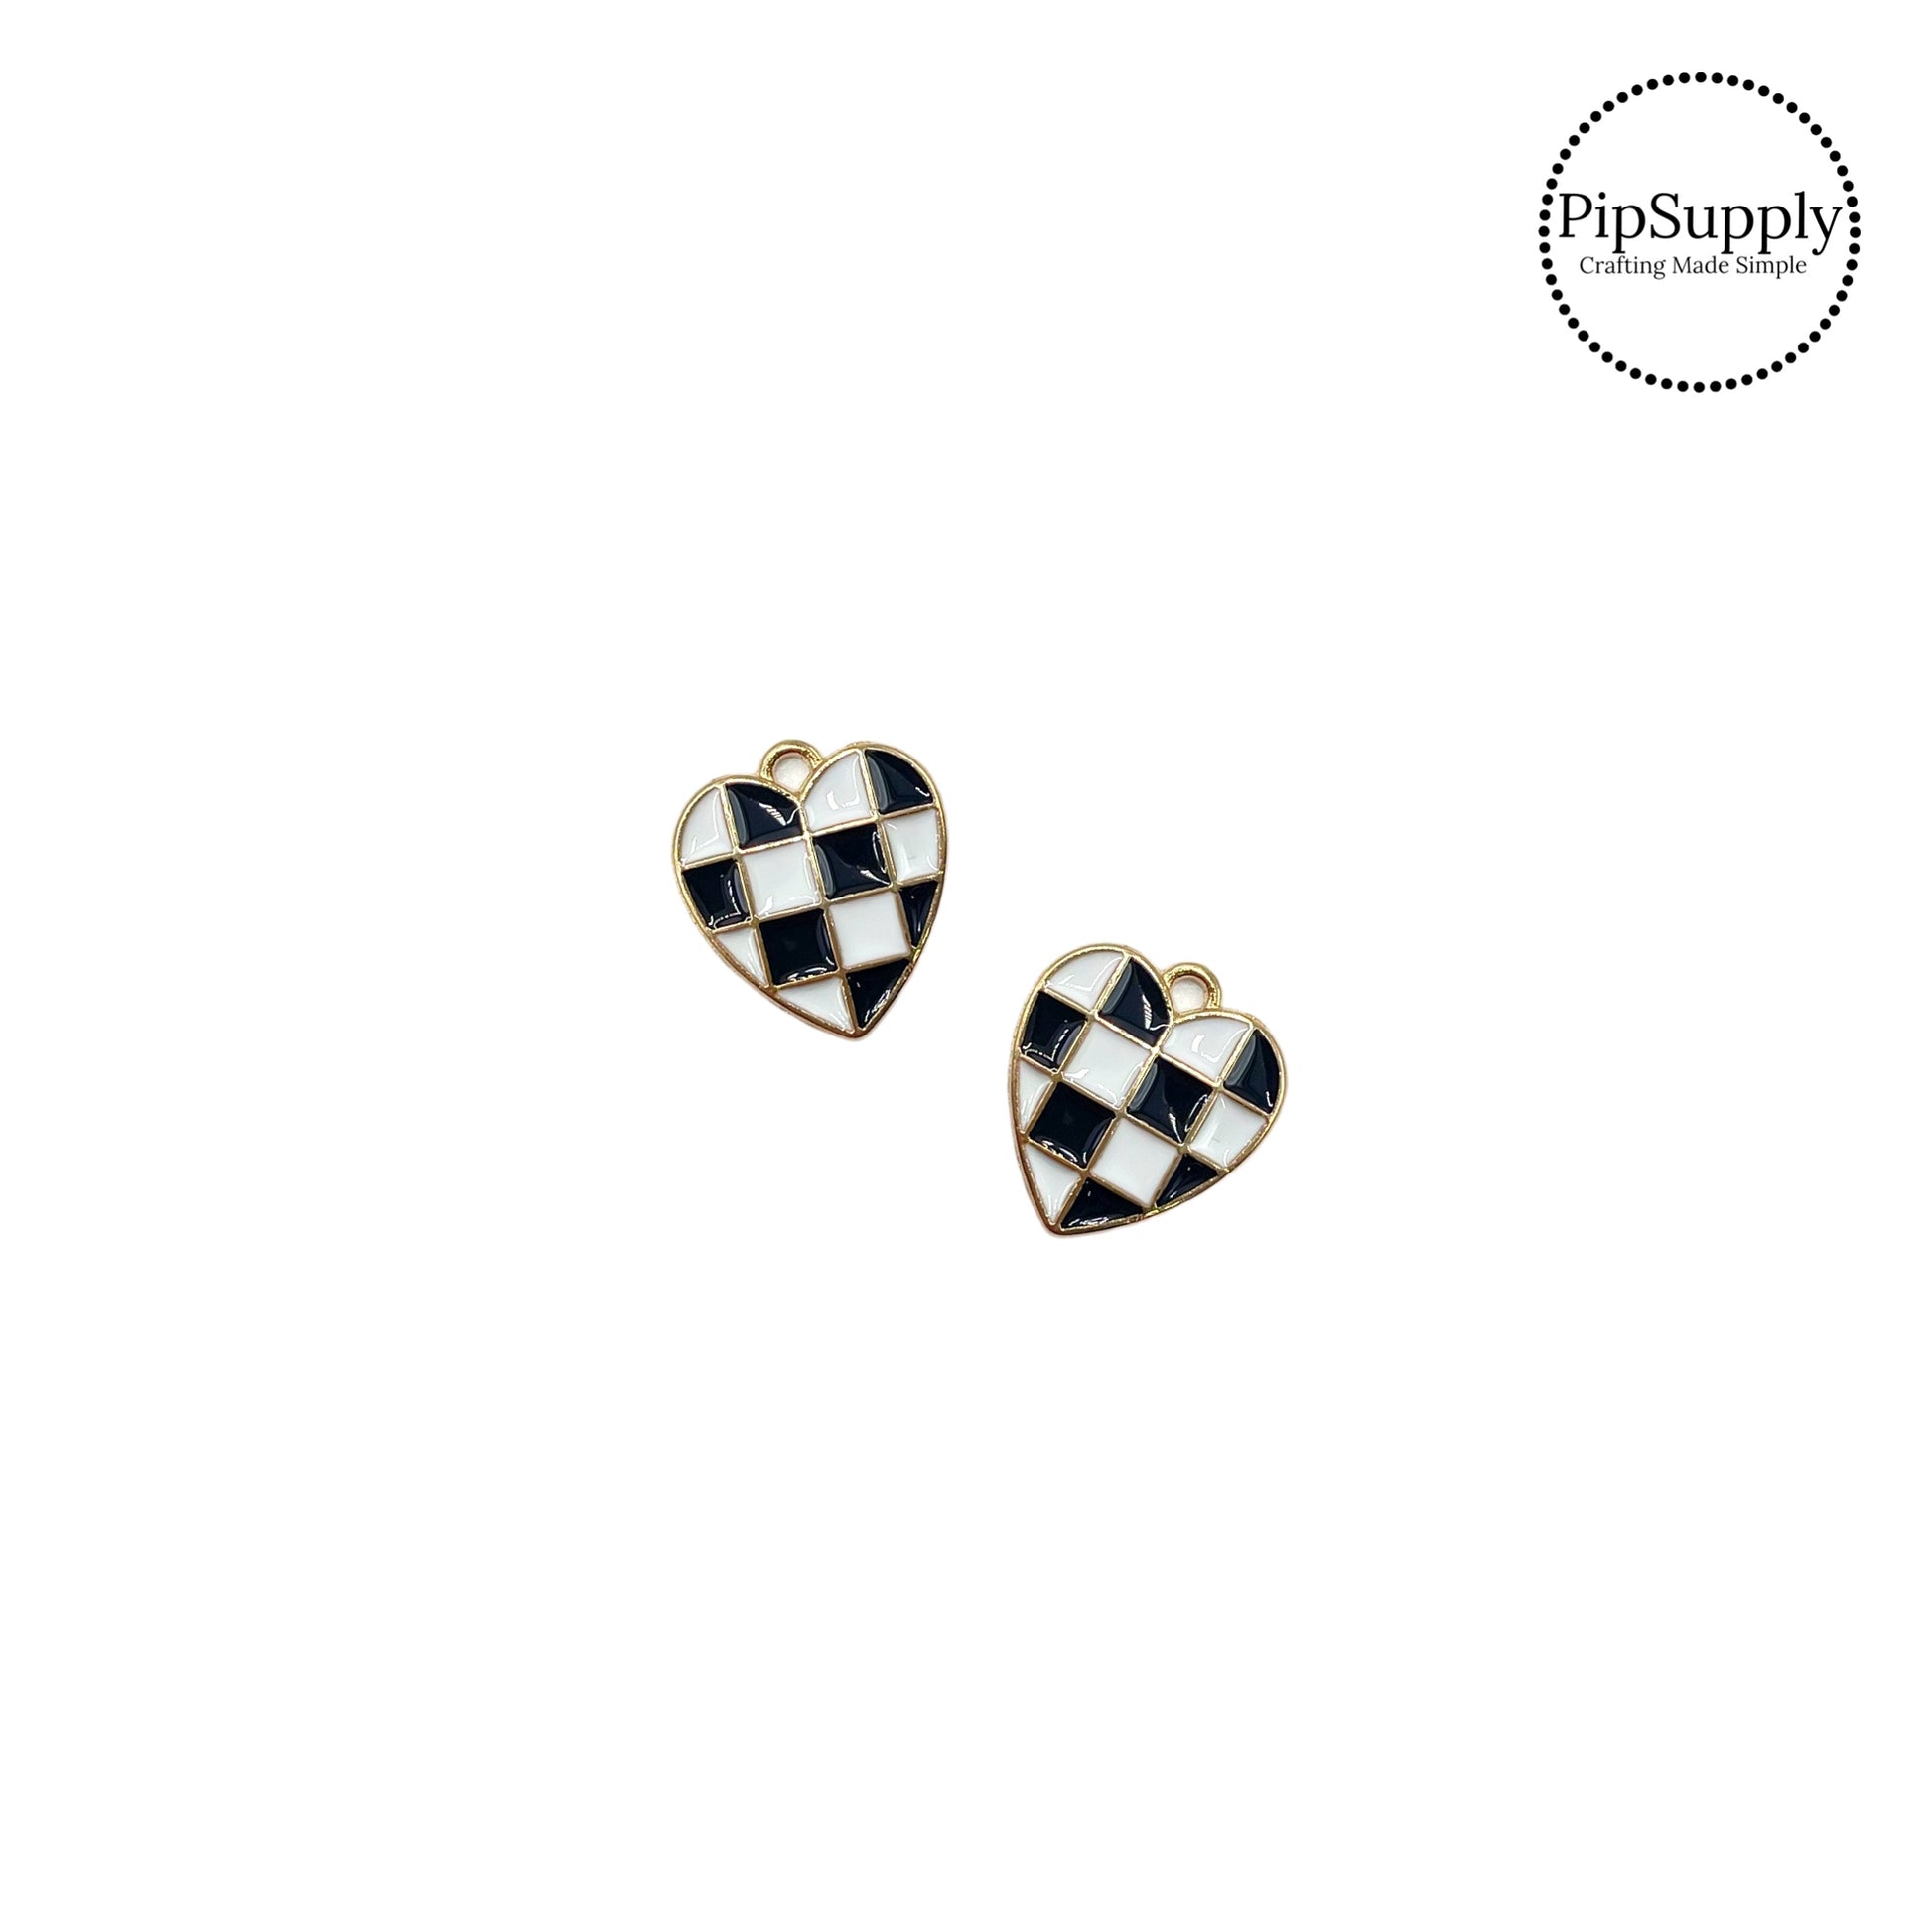 Black and white checker with gold outline heart charm embellishment